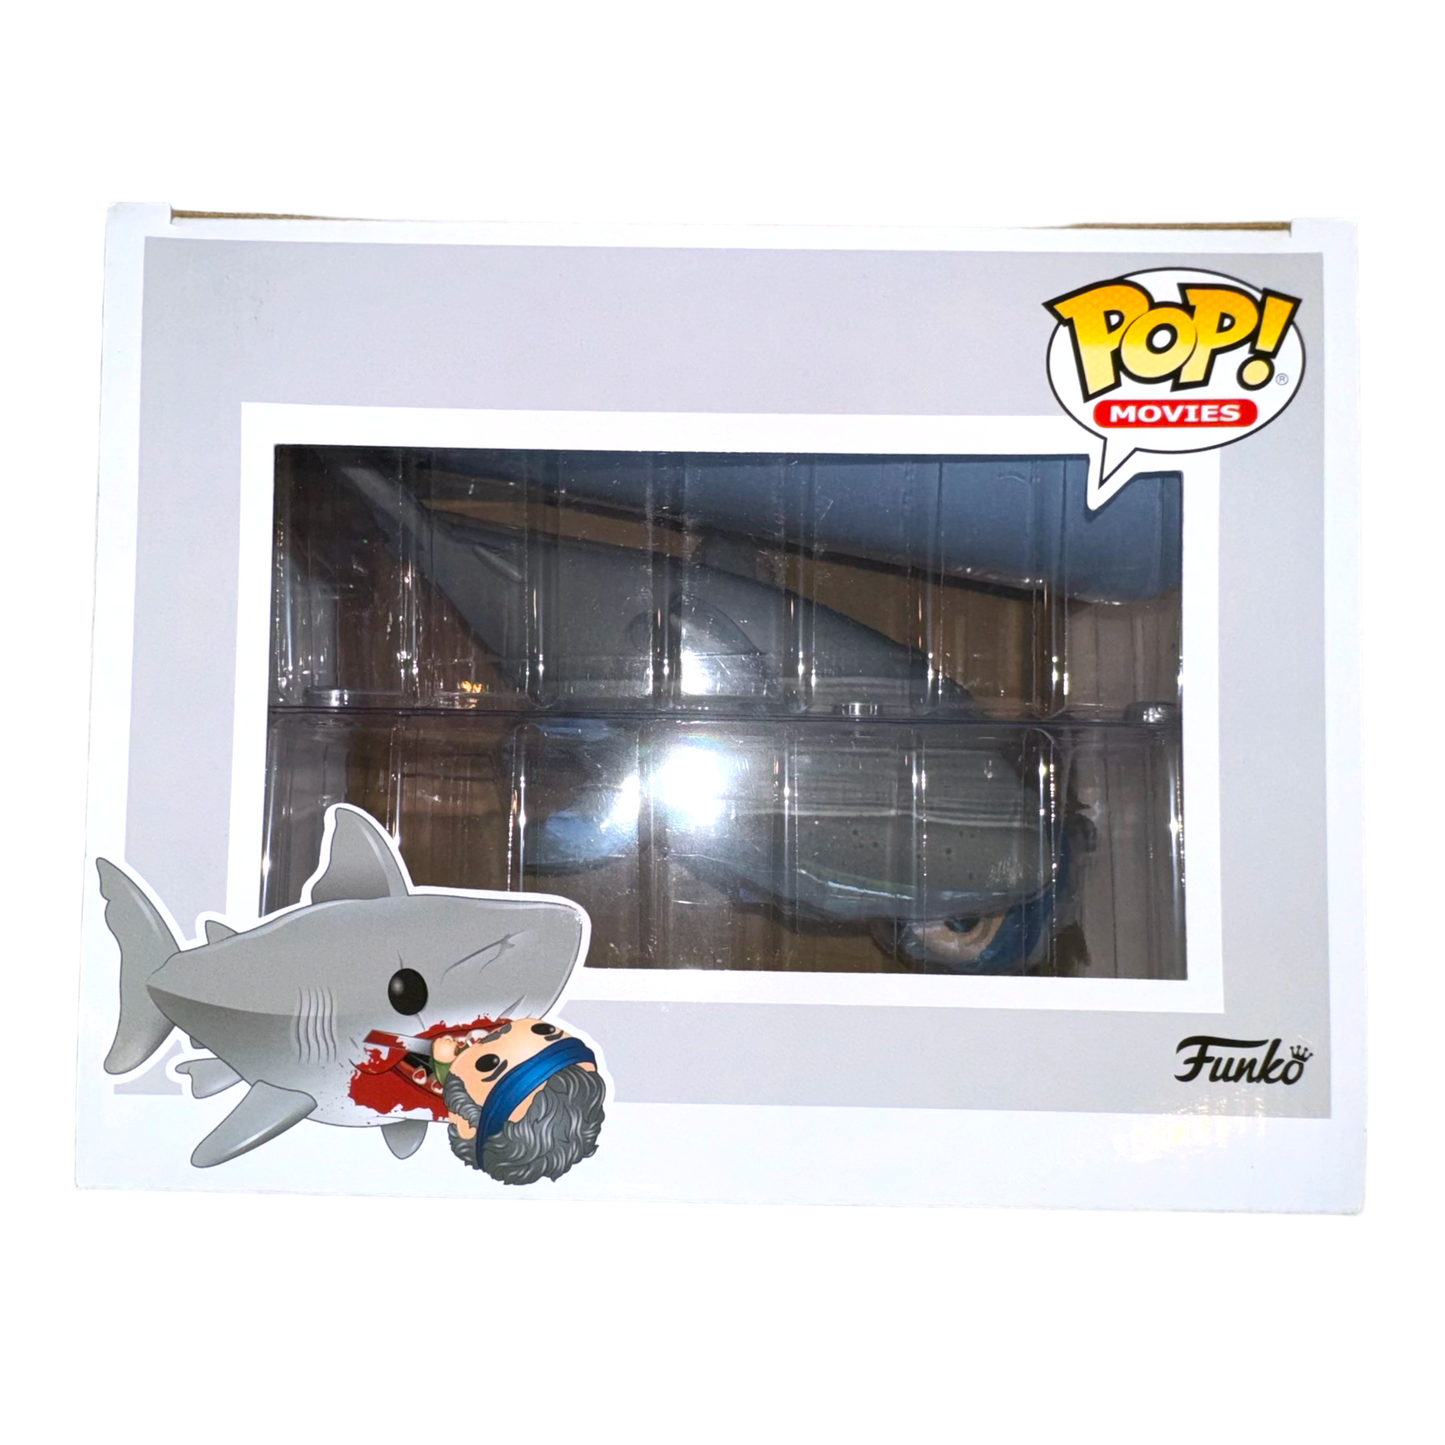 Funko Pop Movies - JAWS Shark Biting Quint #760 SDCC 2019 Sticker Limited Edition